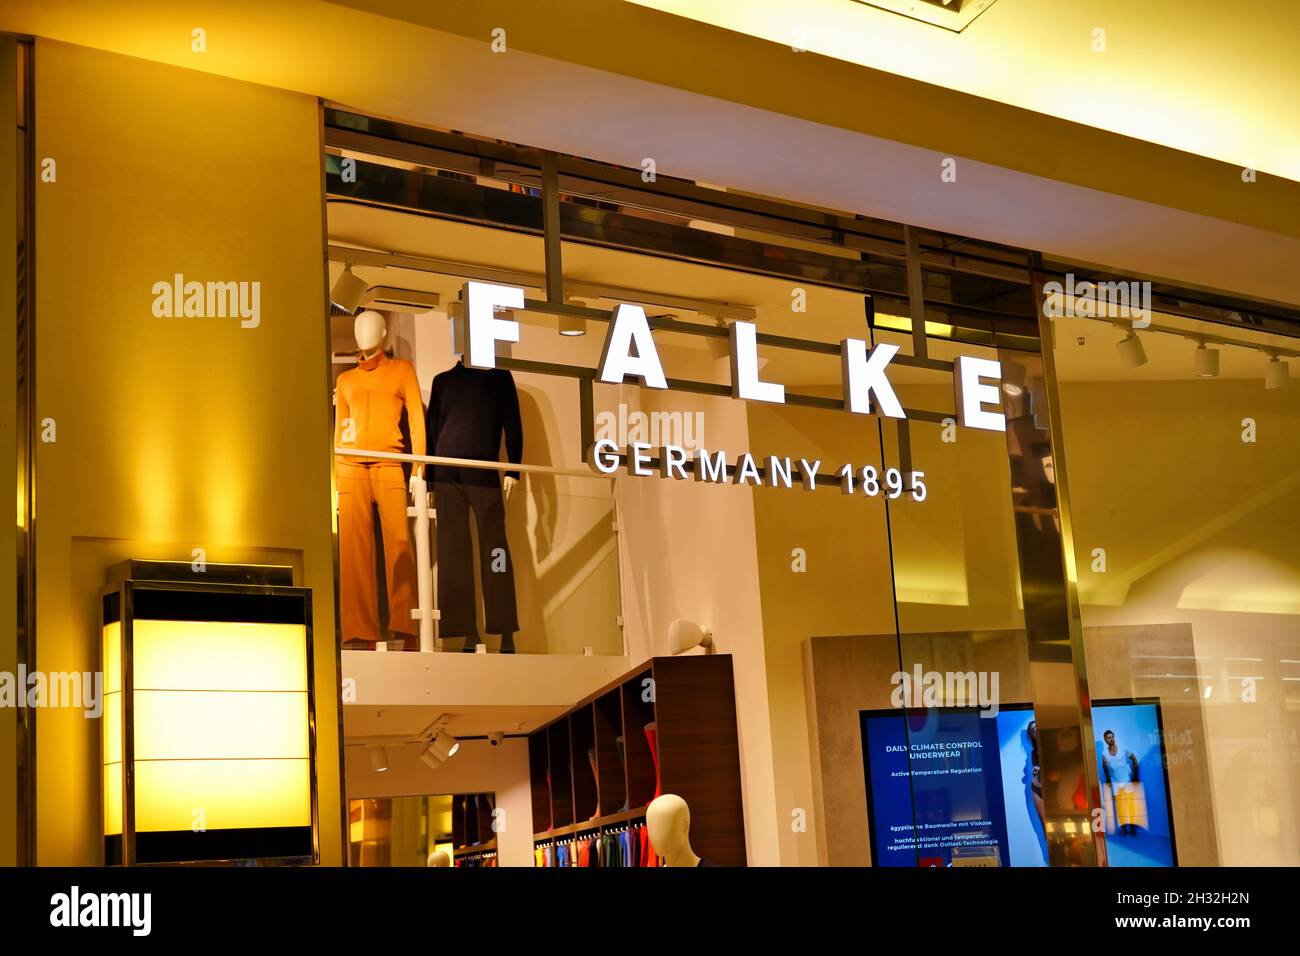 Exterior of the German Falke store in the shopping mall Schadow-Arkaden in Düsseldorf. Falke is a German family-owned hosiery company founded in 1895. Stock Photo